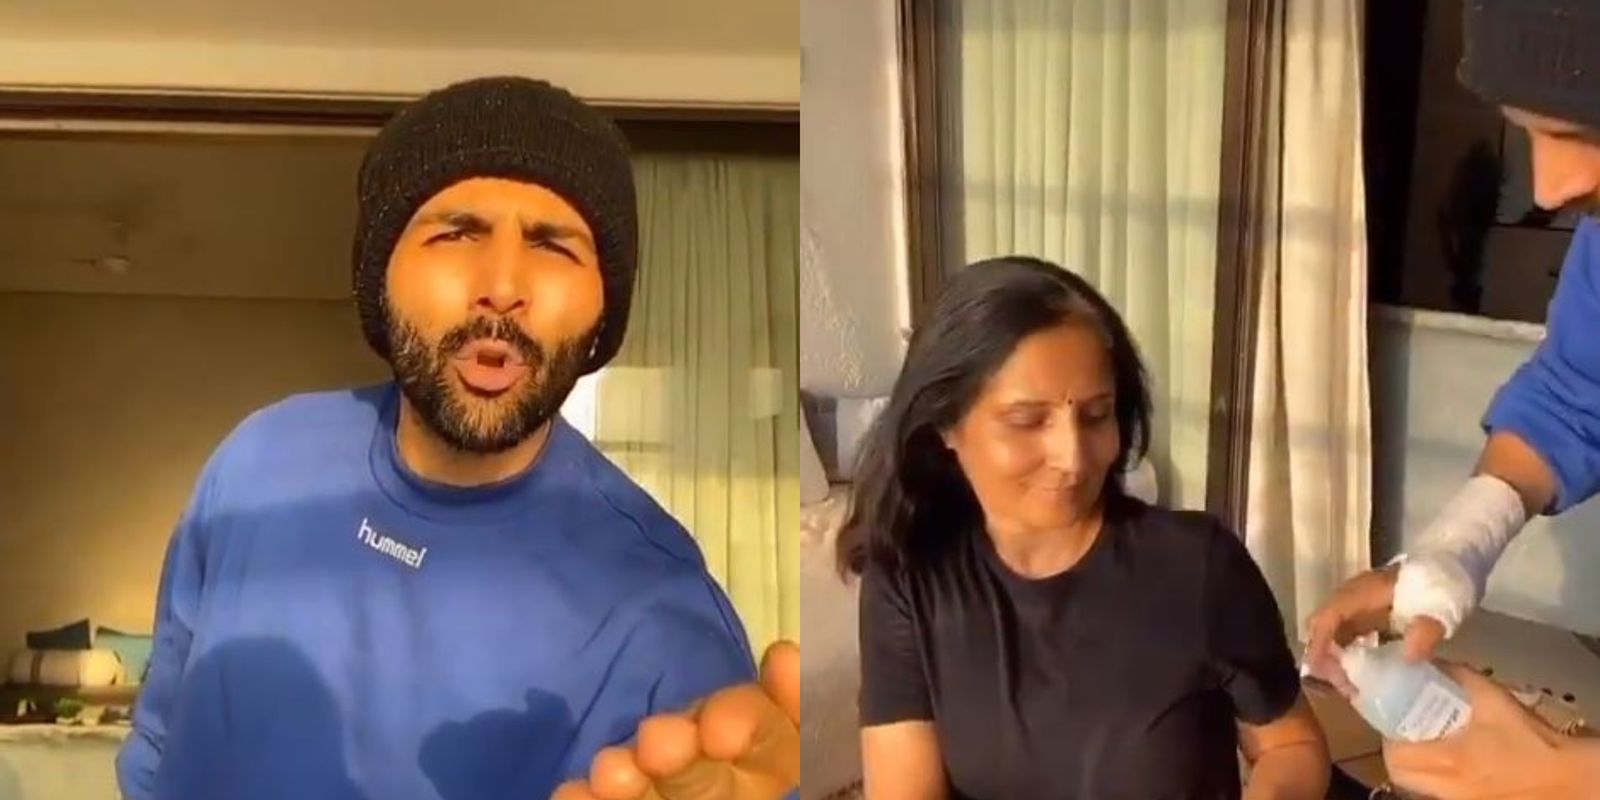 After His Monologue, Kartik Aaryan Raps 'Corona Stop Karo Na' In A Home Video Also Featuring His Mom